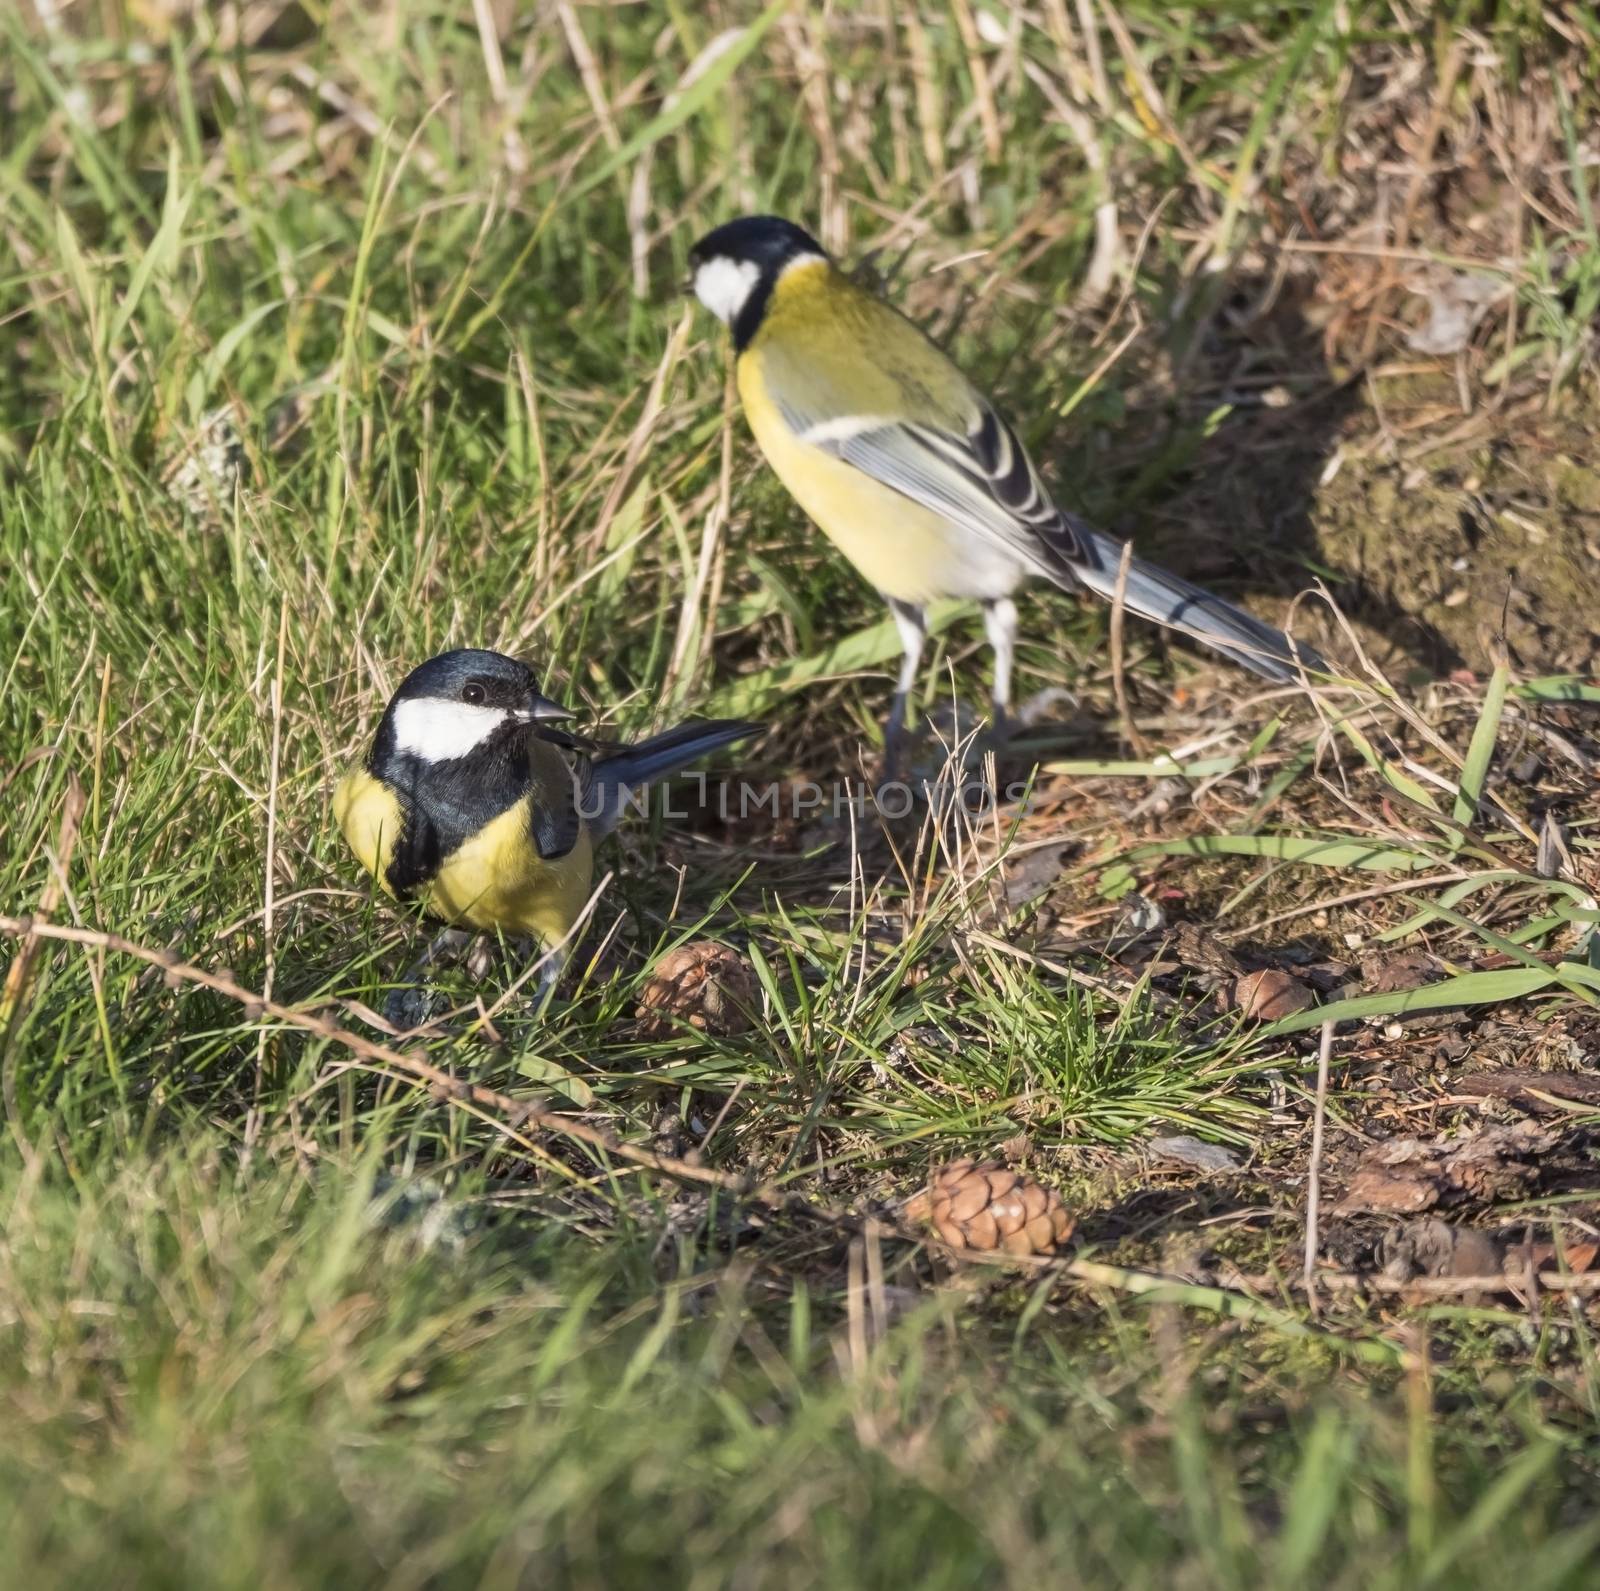 Close up two Great tit, Parus major birds on lush geen grass, selective focus, copy space